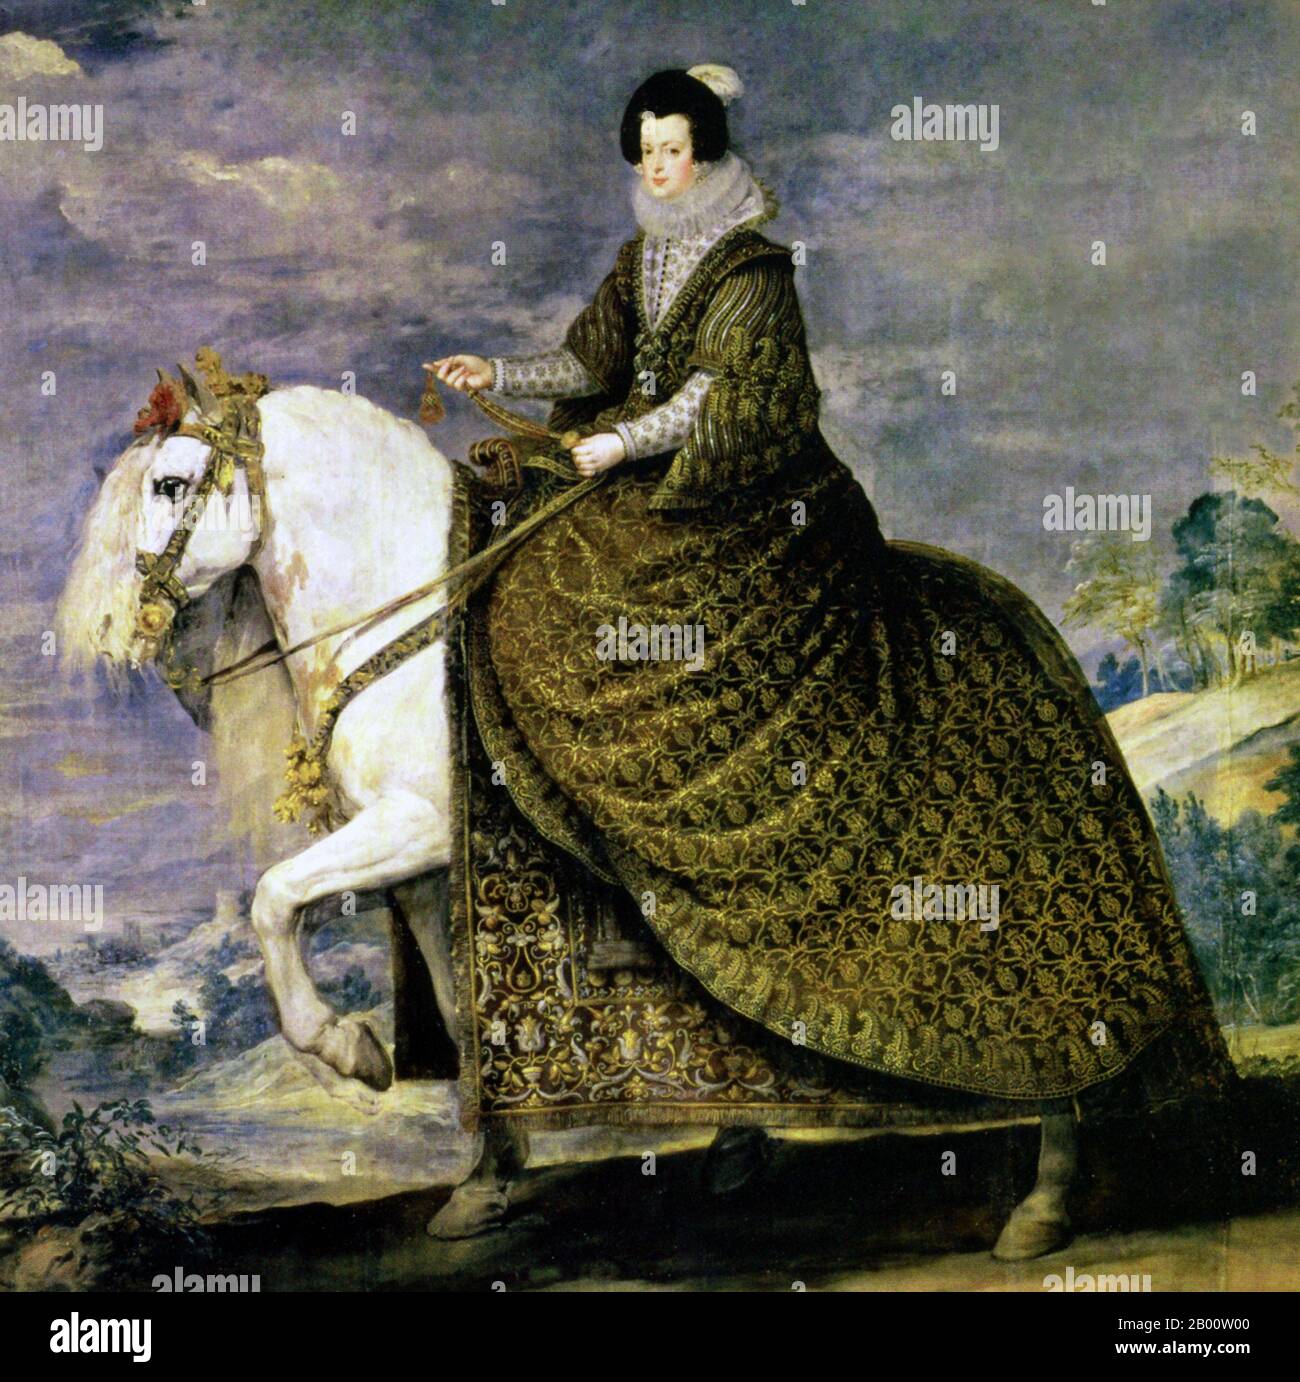 Spain/ France/ Maghreb: Isabel of Bourbon is portrayed on an Andalusian horse. Oil on canvas painting by Diego Velazquez (1599-1660), c. 1635.  Isabella of Bourbon/Elisabeth of France (1602-1644) was Queen Consort of Spain and Portugal, and was married to King Philip V of Spain. She briefly served as regent during the Catalan Revolt in 1640-1642, and once again in 1643-1644.  The Andalusian horse was a crossbreed of the North African Barb and the Spanish horse, which was developed at the Umayyad court in Cordoba and was the preferred mount of many European royals. Stock Photo